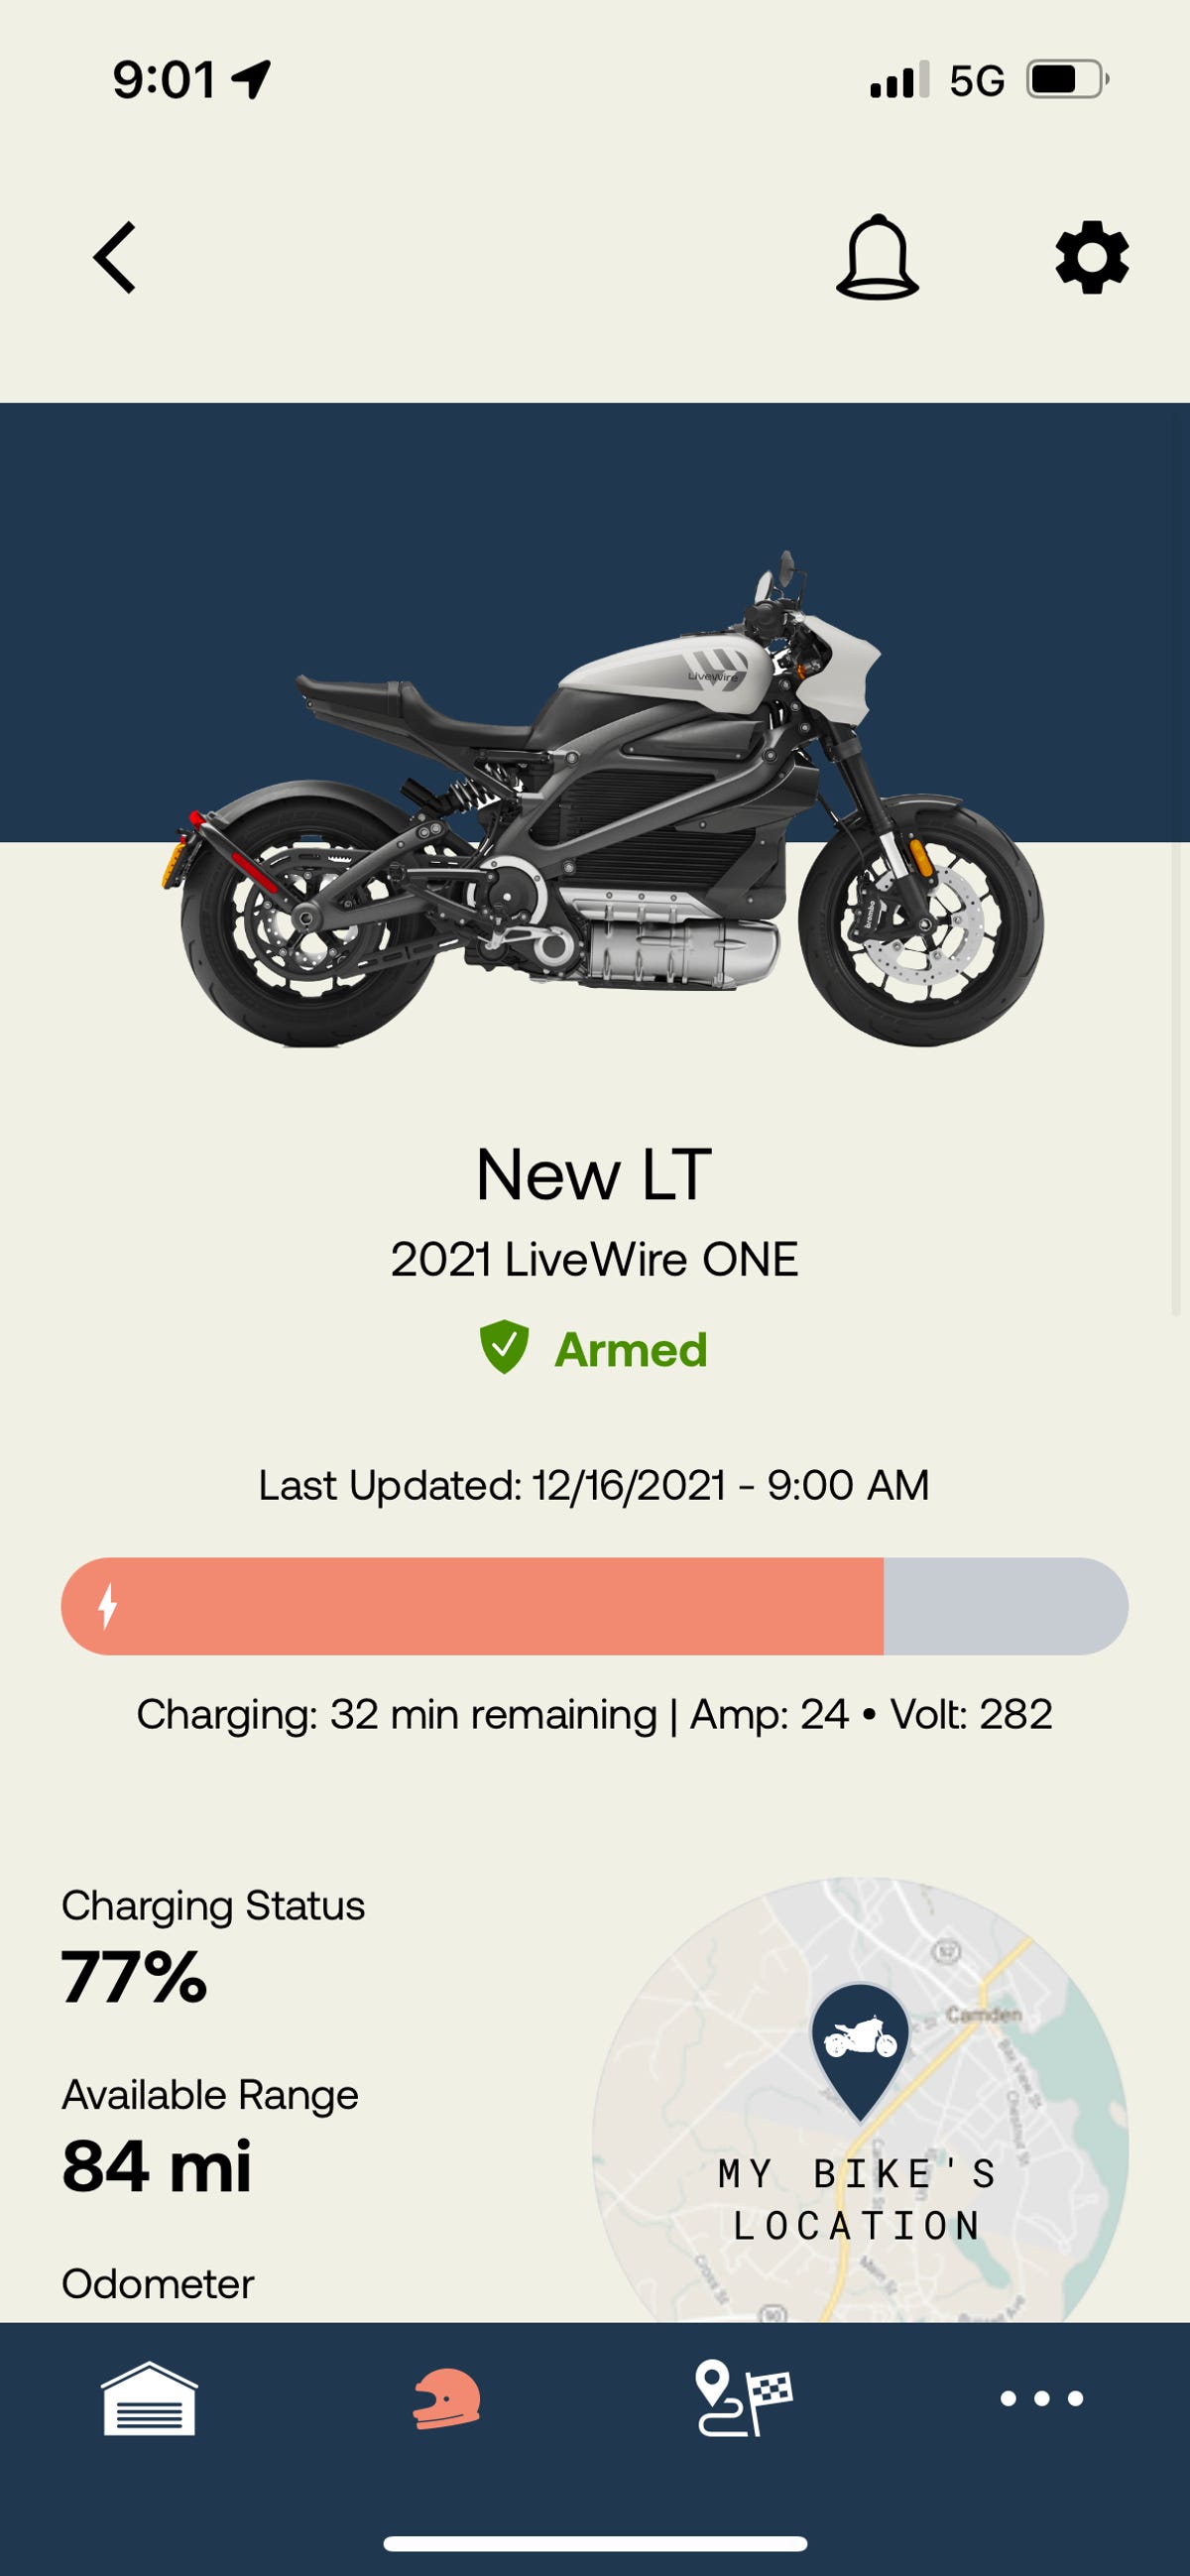 App showing the bike's location and charge status